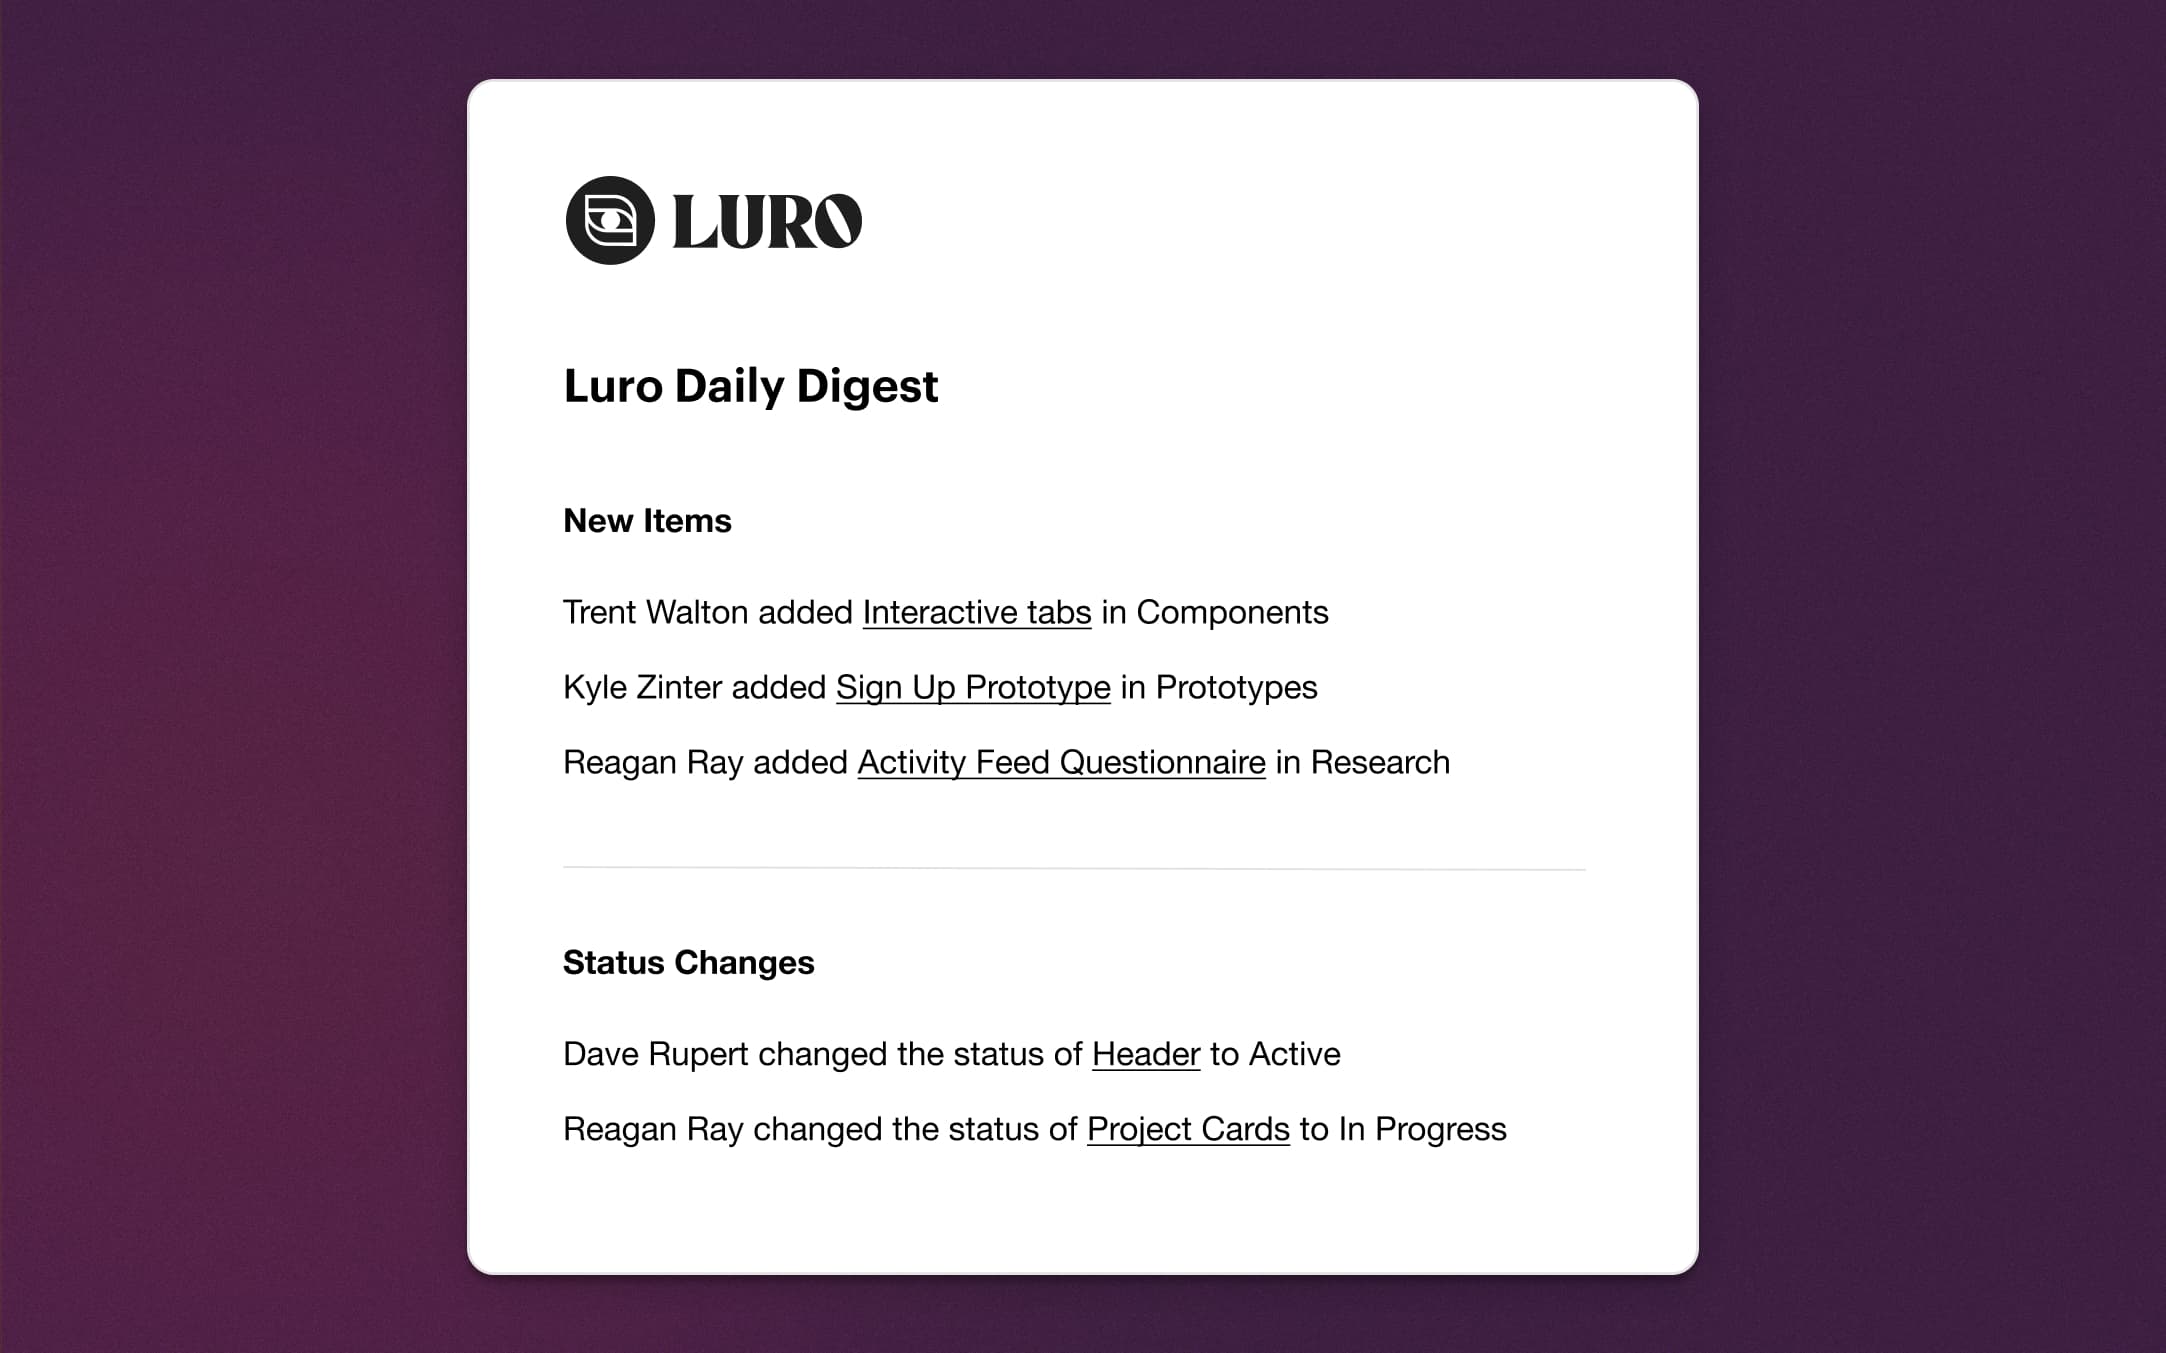 Luro daily digest notification email